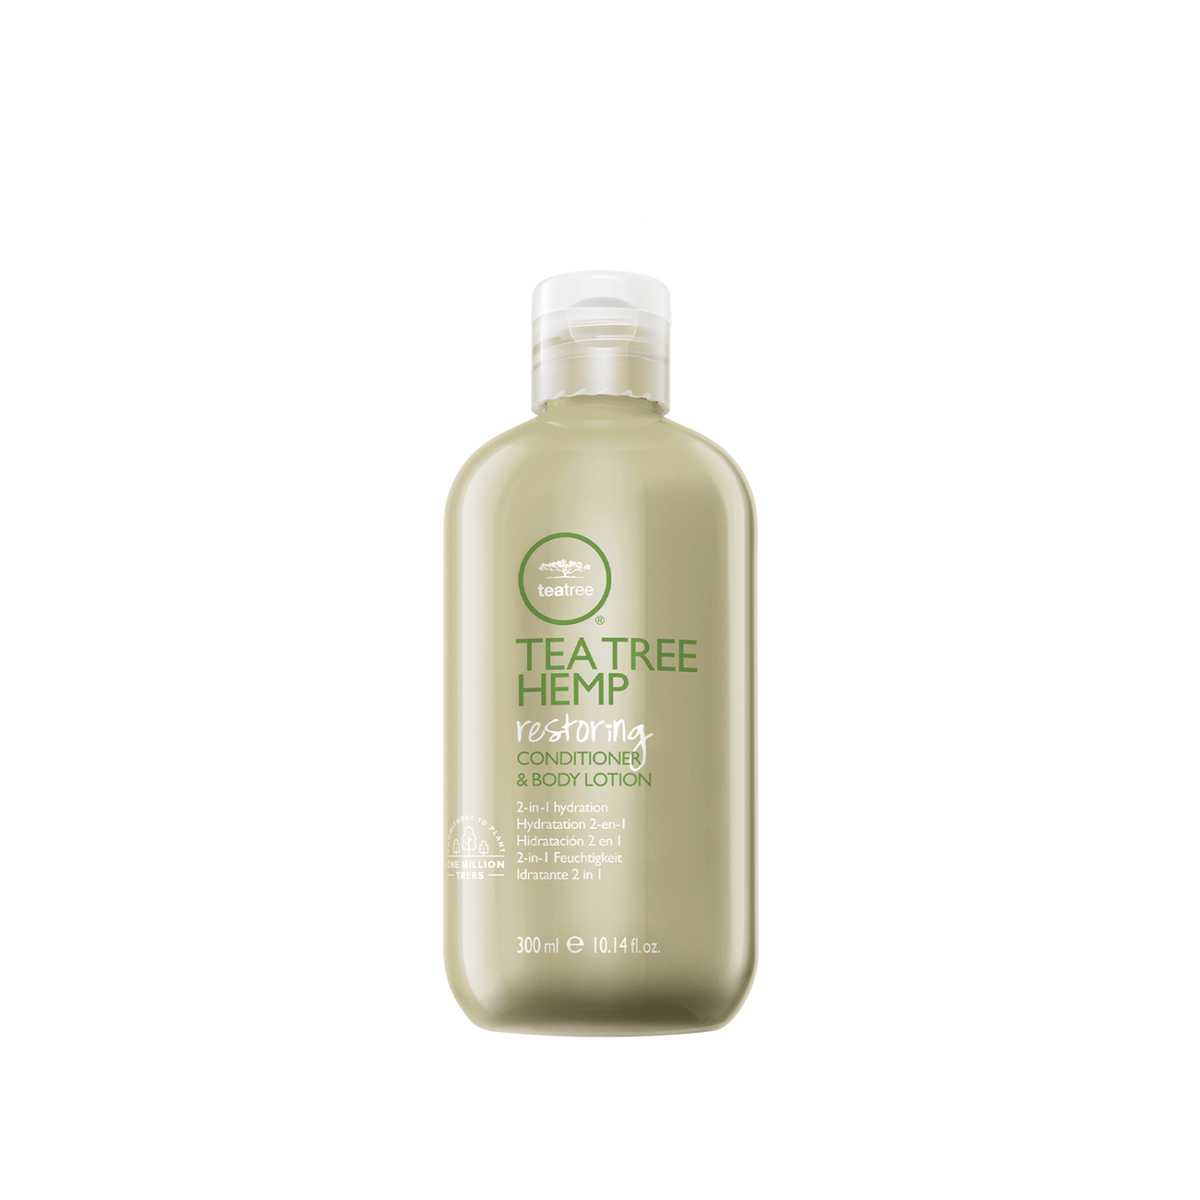 Tea Tree Hemp Restoring Conditioner & Body Lotion - 300ML - by Paul Mitchell |ProCare Outlet|